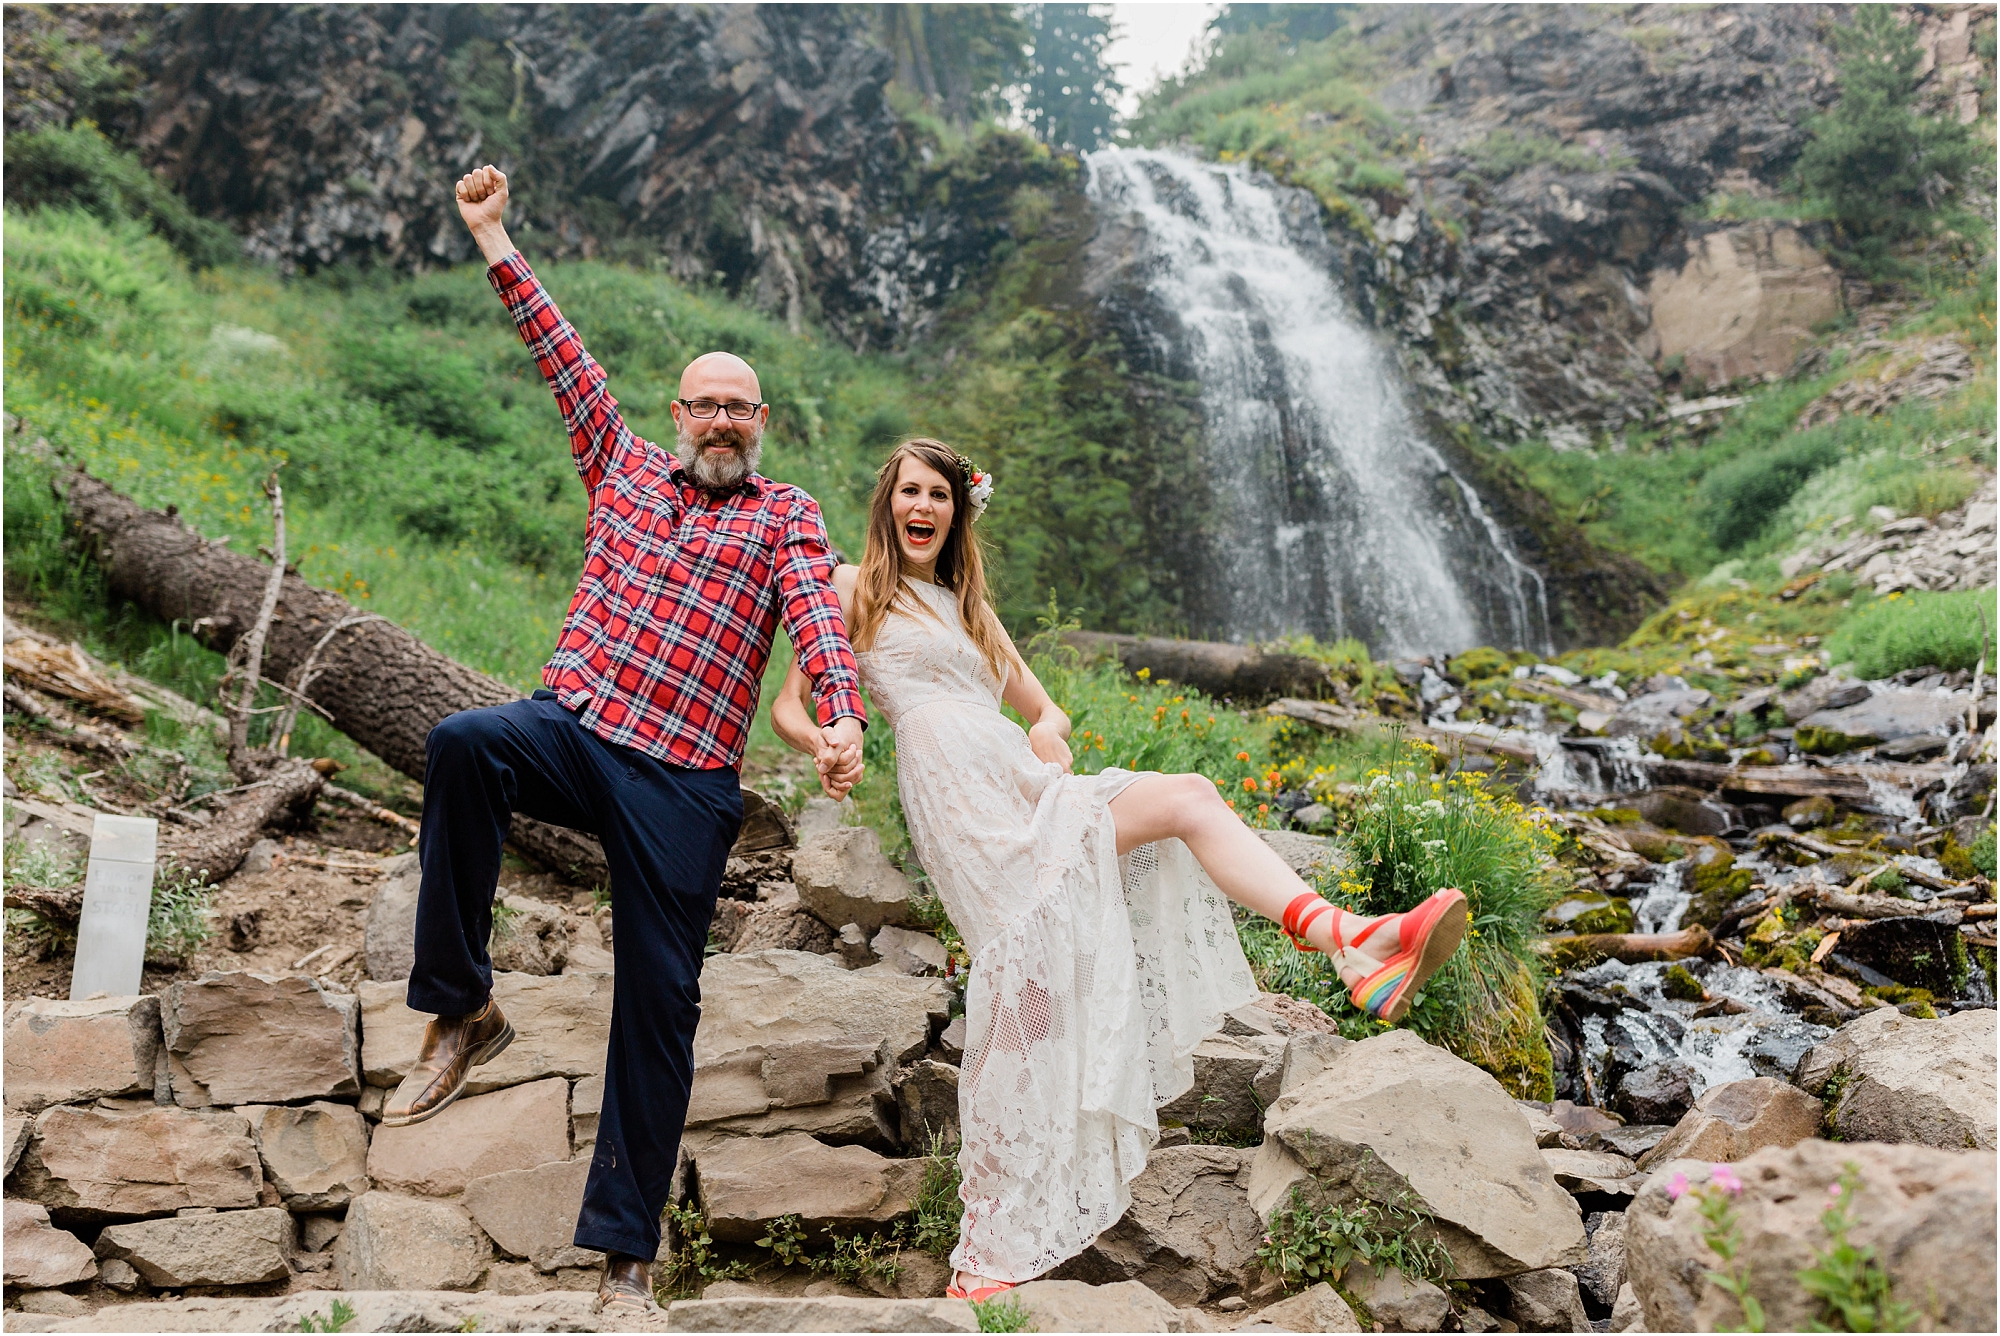 A wedding couple celebrates their marriage after their Crater Lake elopement in Oregon. | Erica Swantek Photography